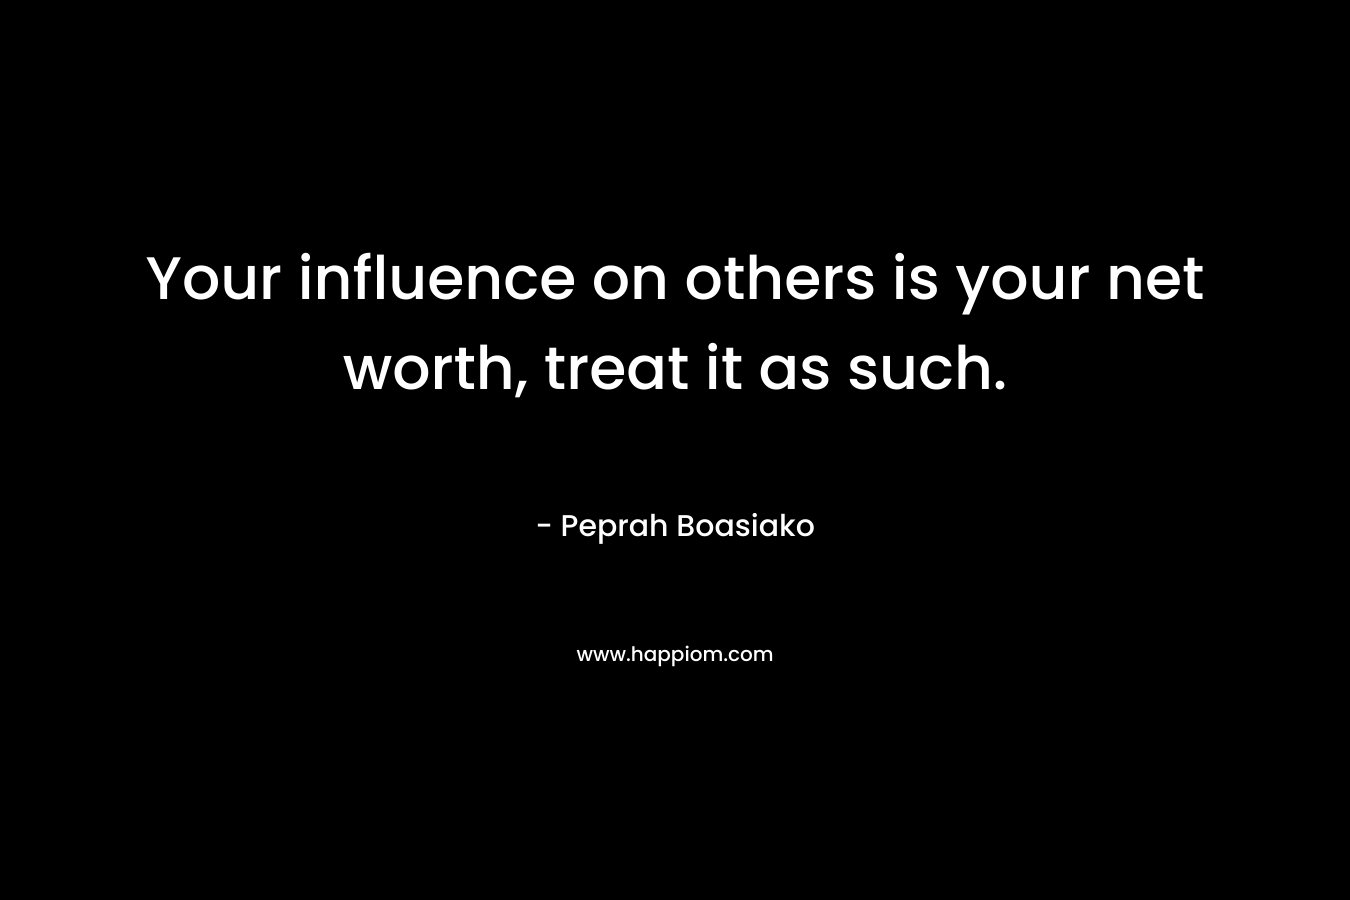 Your influence on others is your net worth, treat it as such. – Peprah Boasiako